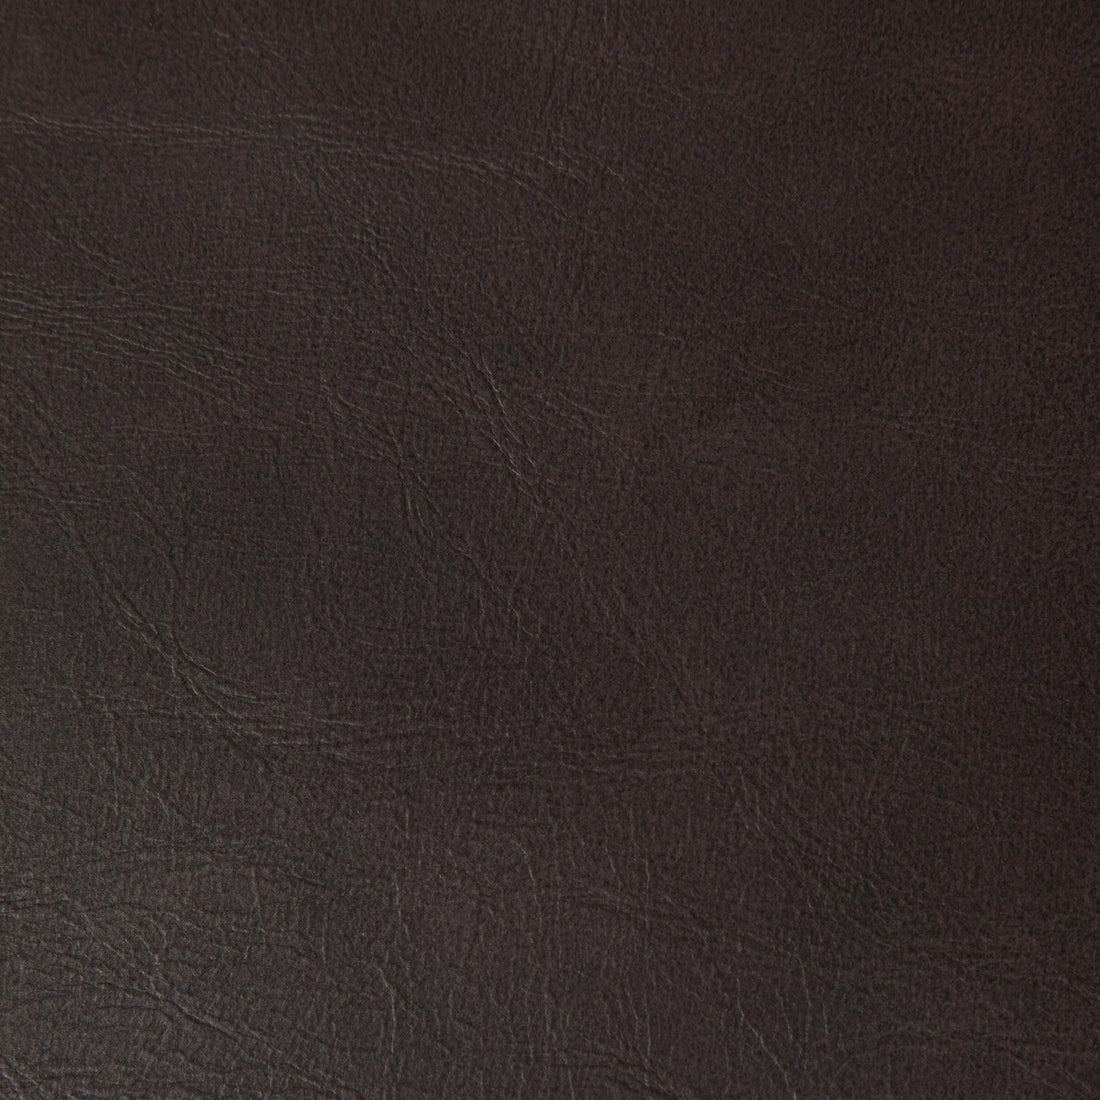 Rambler fabric in cacao color - pattern RAMBLER.6.0 - by Kravet Contract